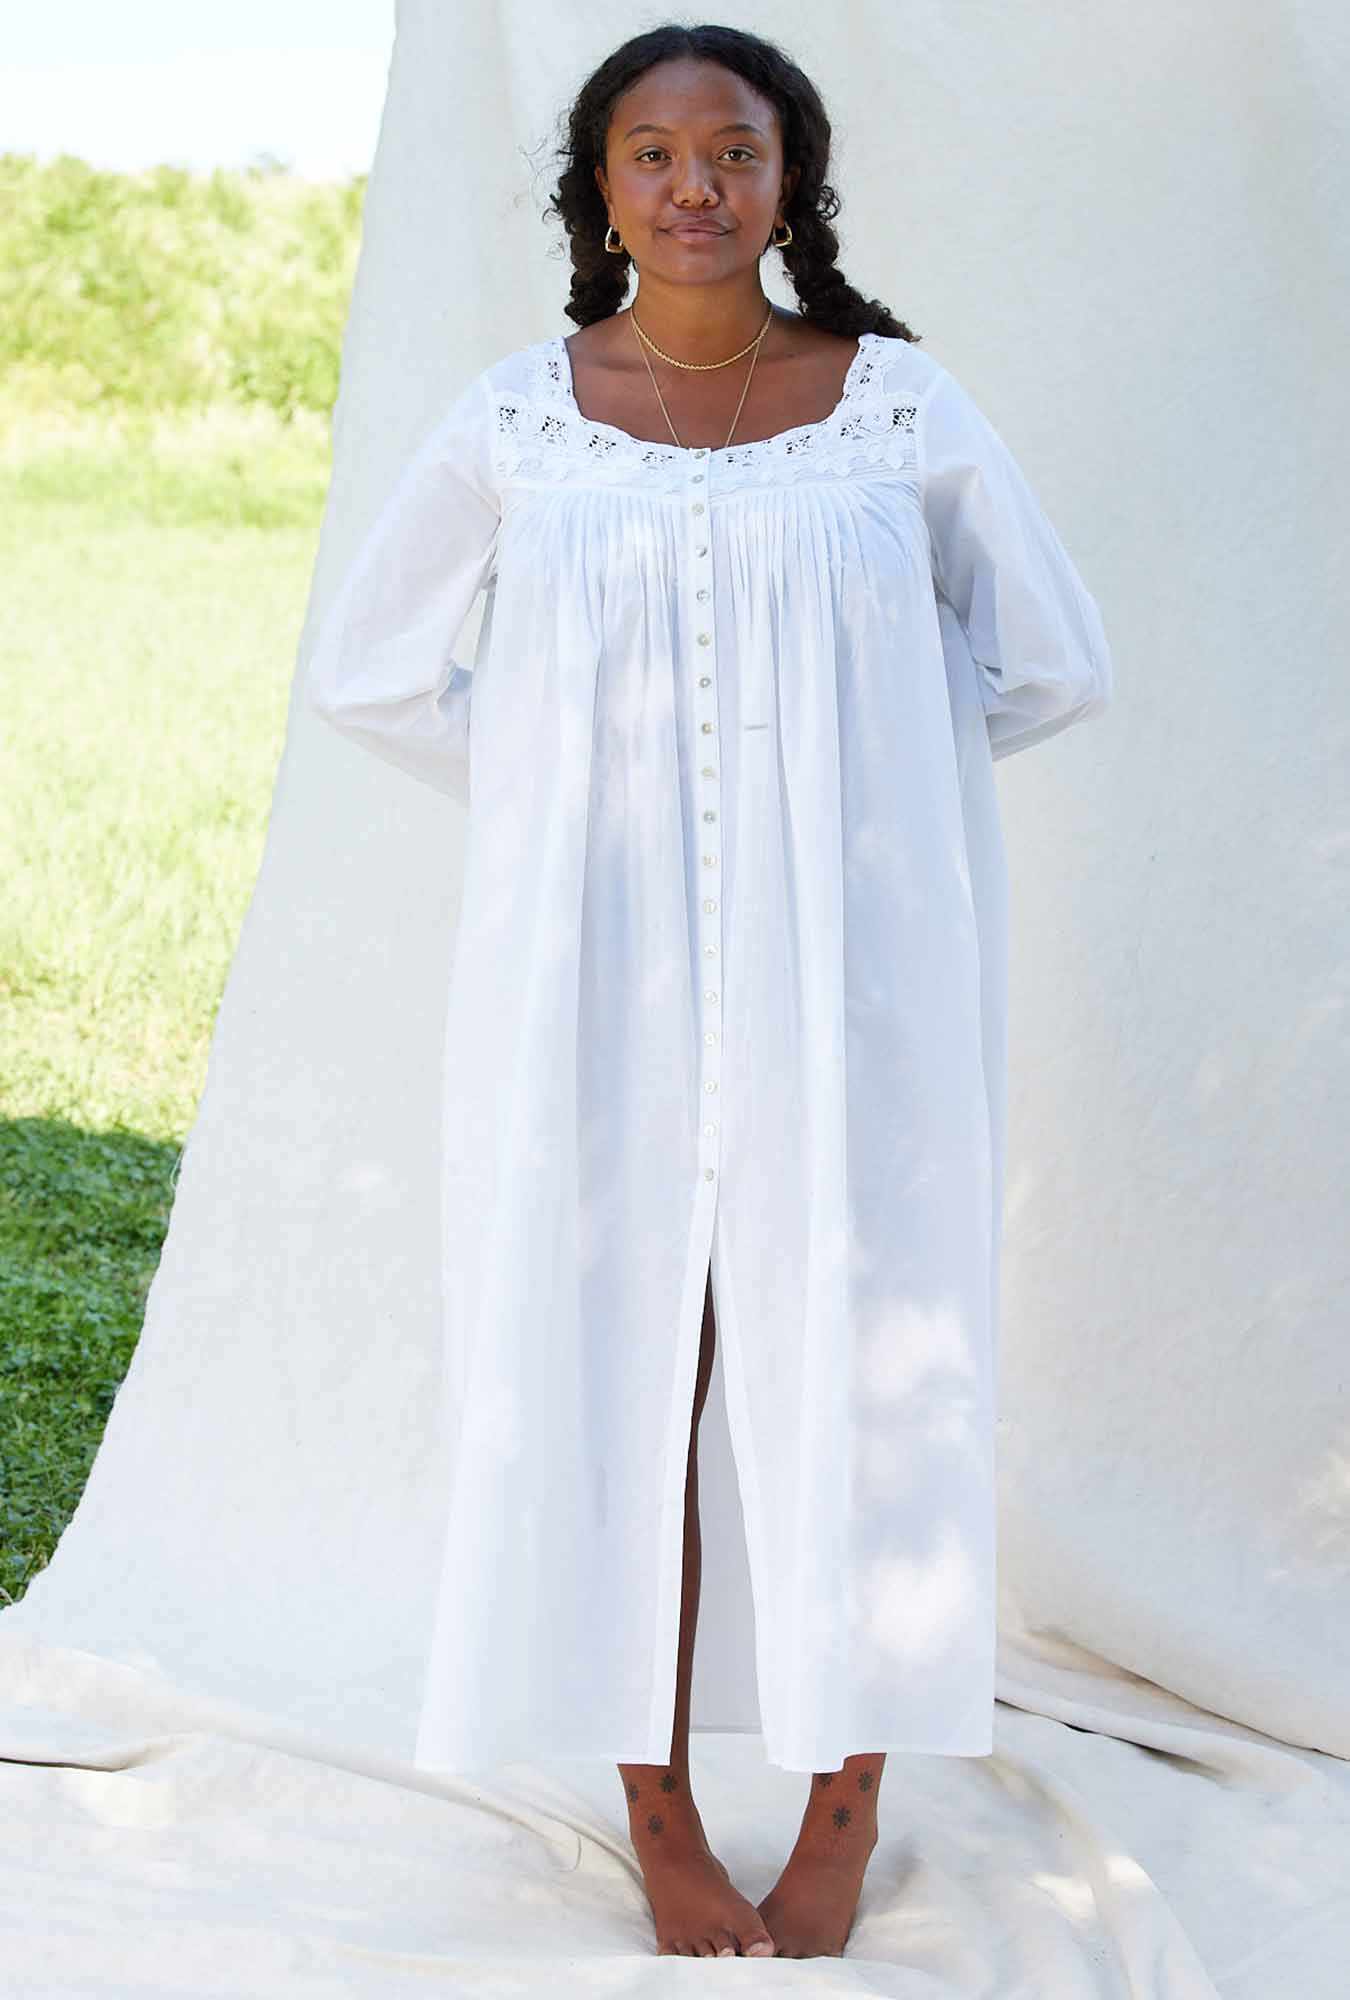 Full Length Cotton Nightgown